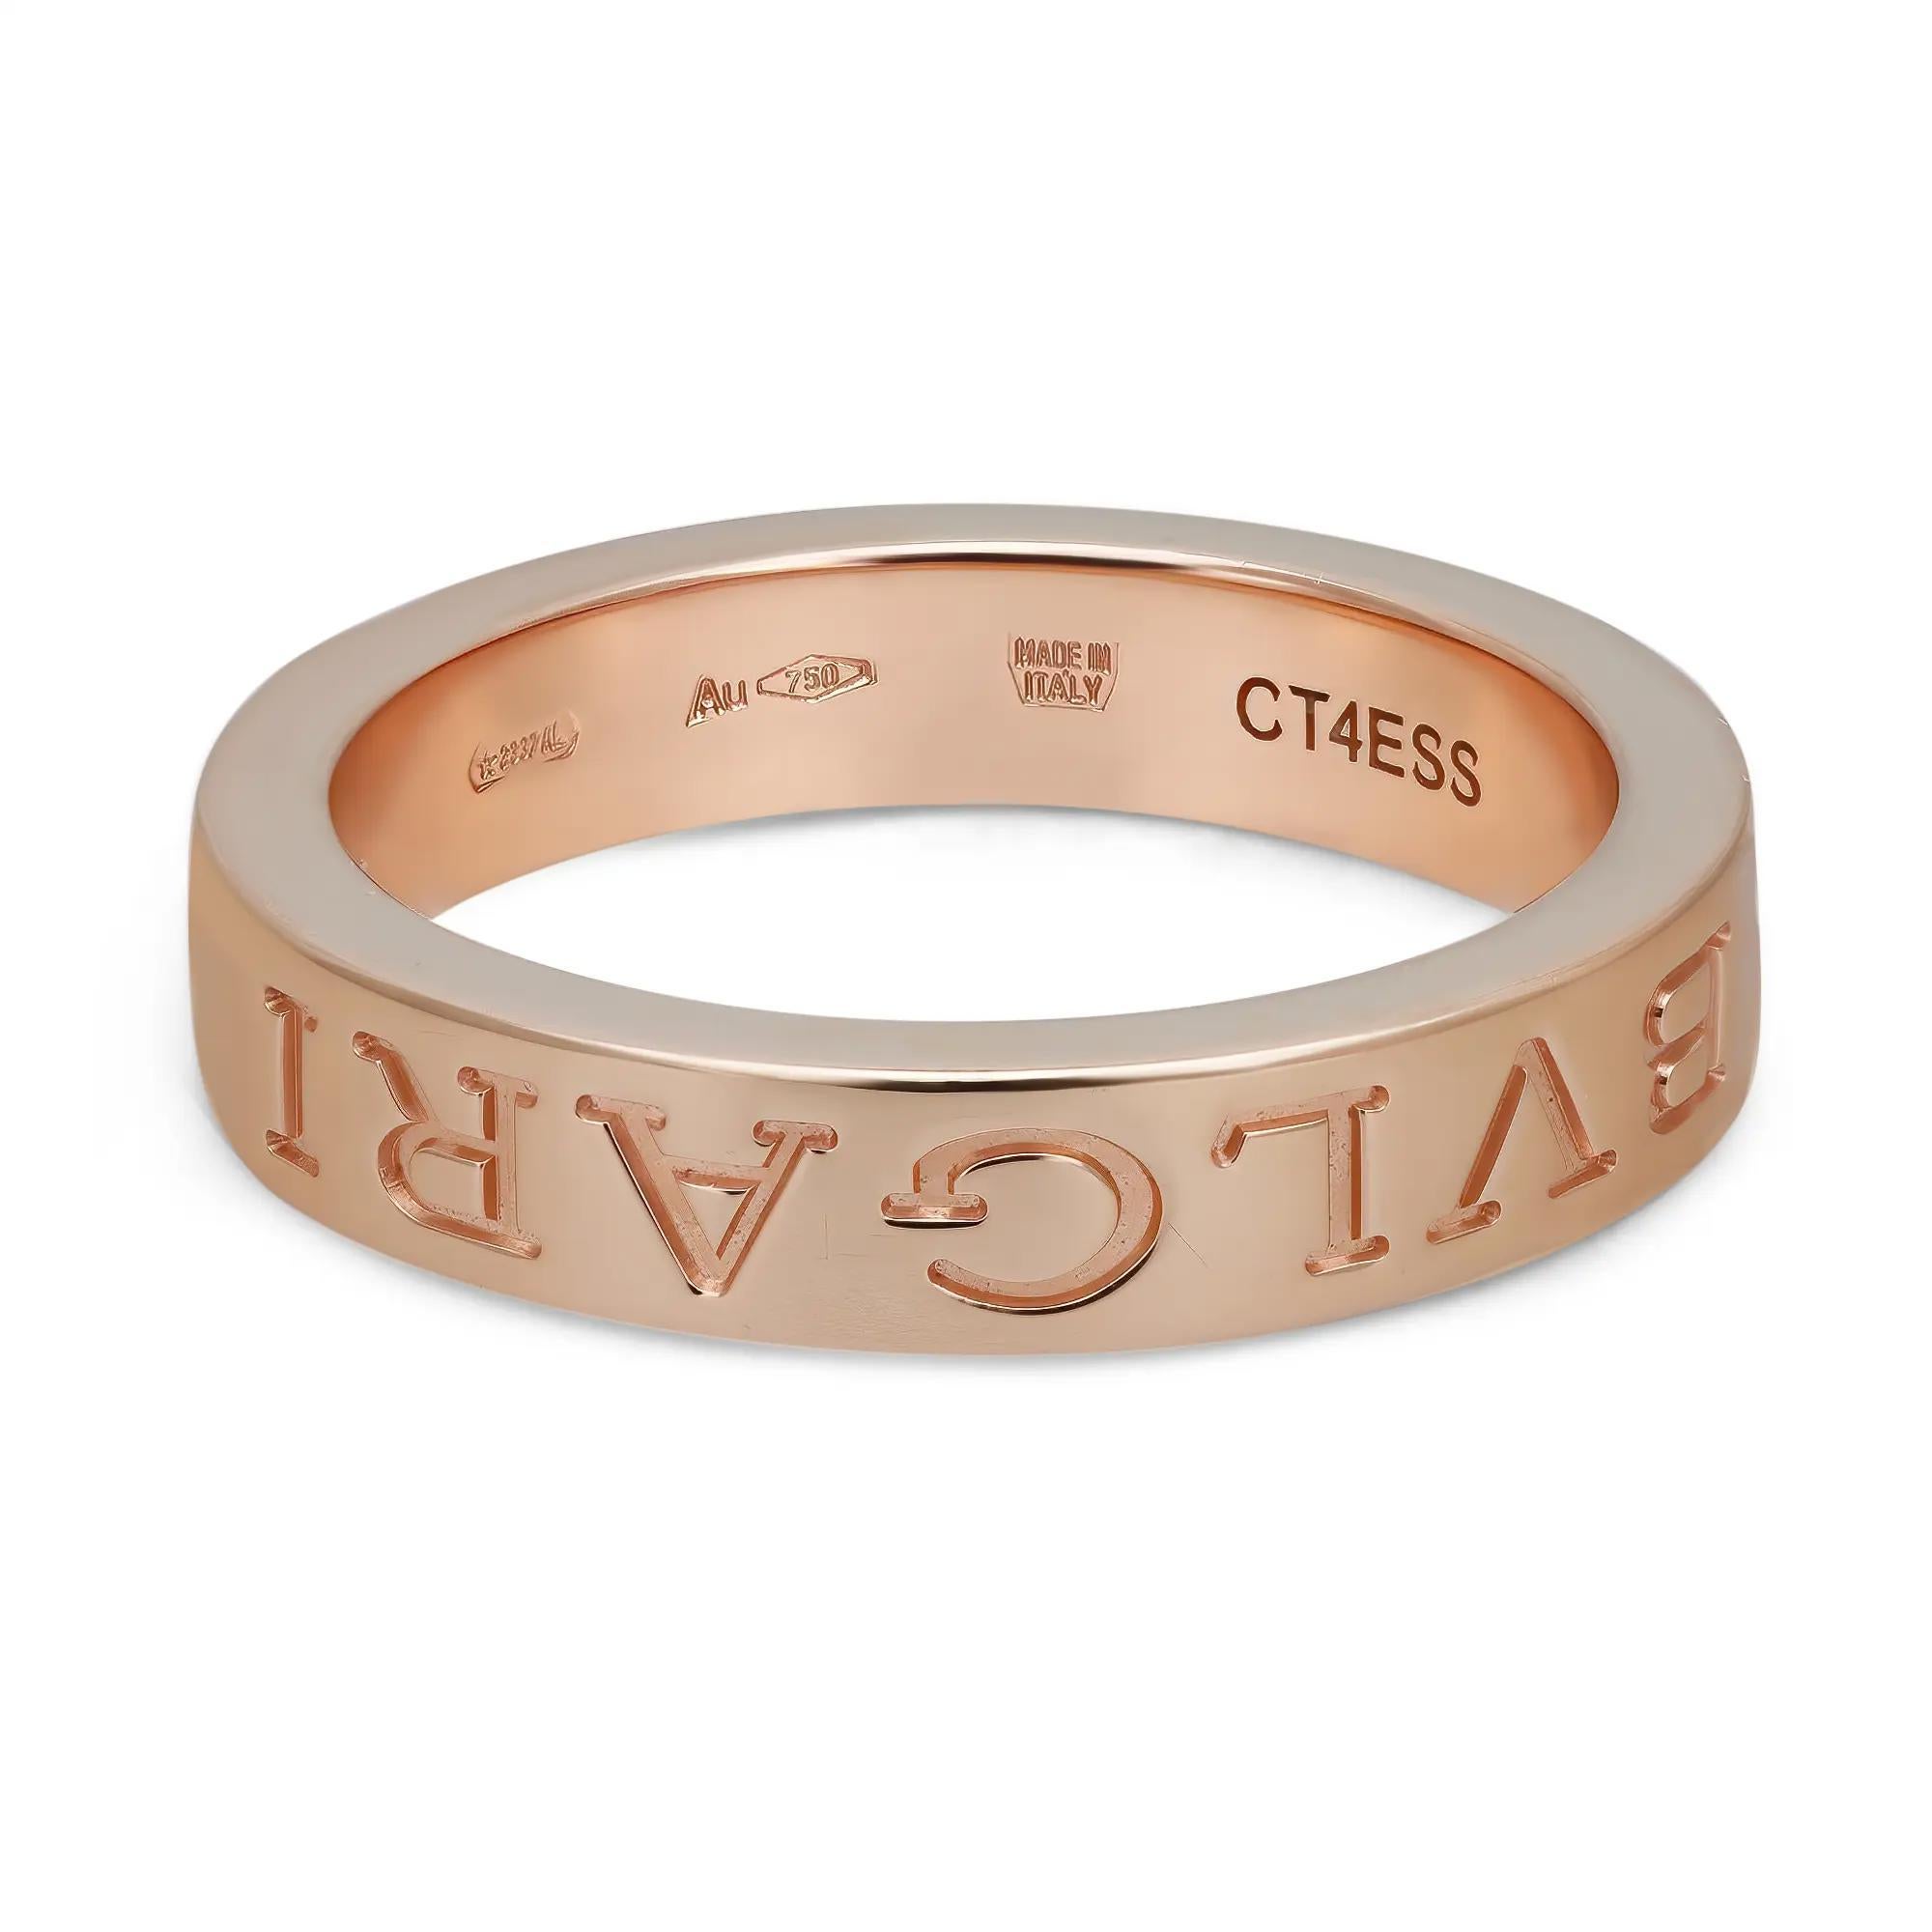 Bvlgari B.Zero1 Essential Diamond Band Ring featuring a center round cut diamond with engraved BVLGARI logo on both sides. Crafted in lustrous 18K rose gold. Ring size: 53 US 6.5. Width: 3.9mm. Diamond weight: 0.04 carat. Total weight: 6.76 grams.